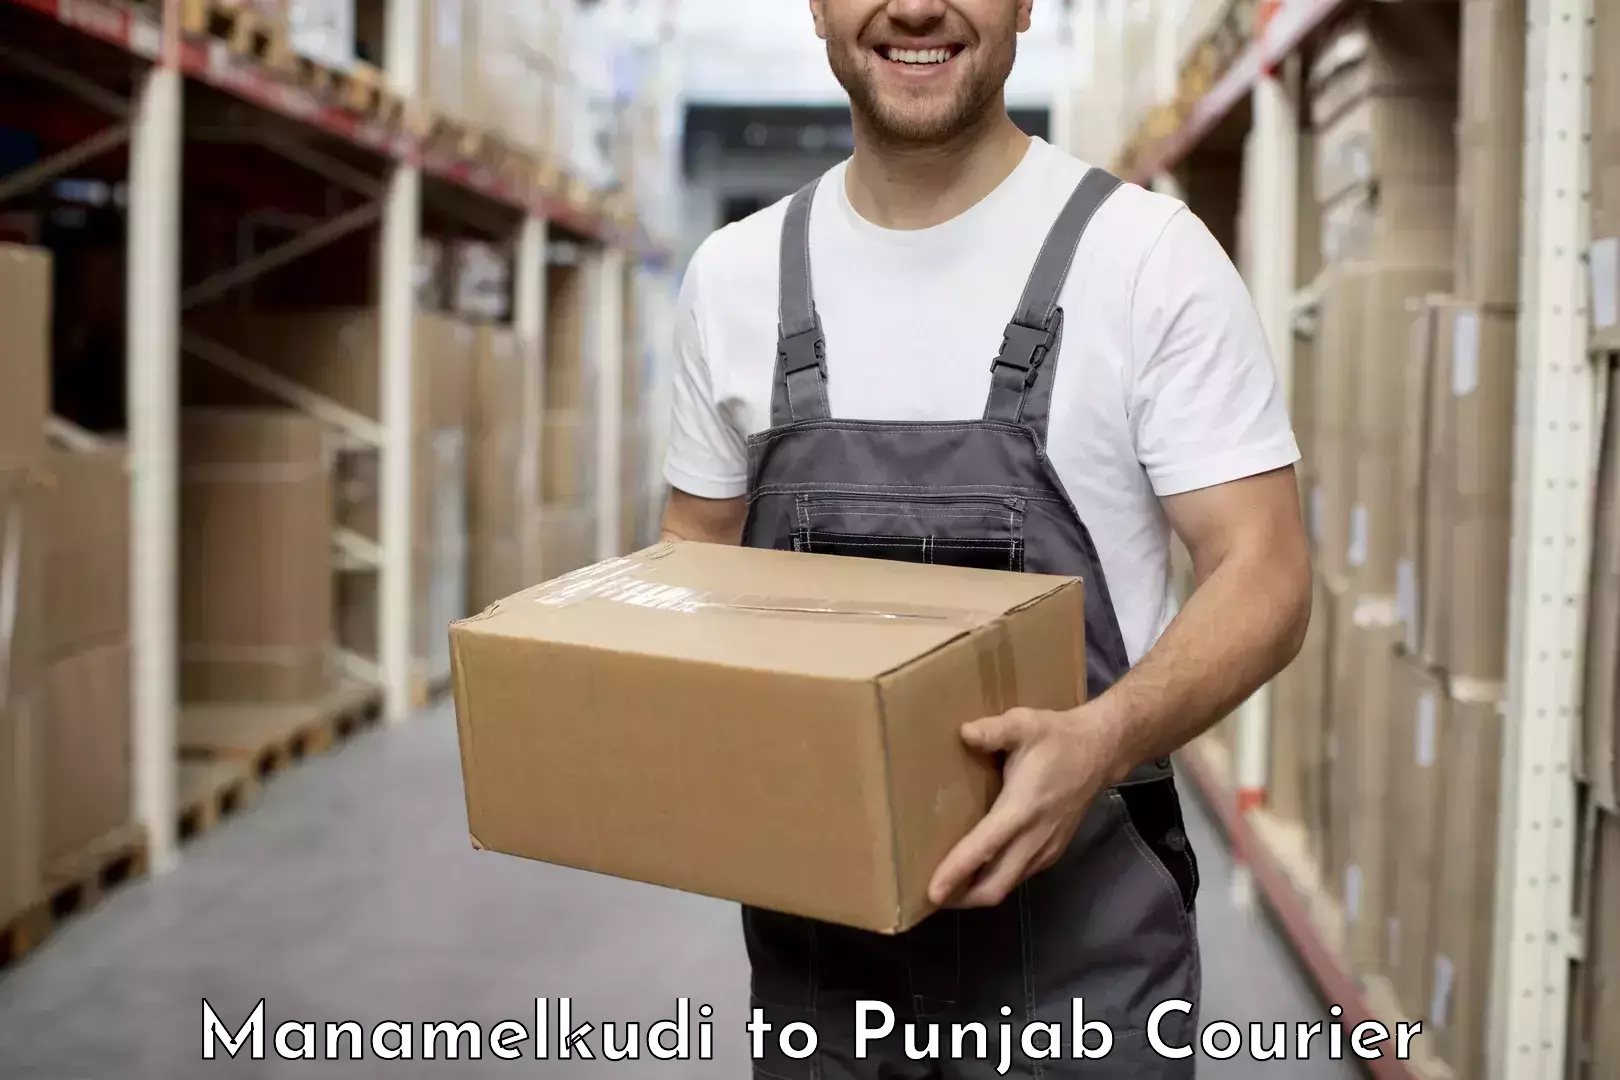 Fastest parcel delivery Manamelkudi to Firozpur